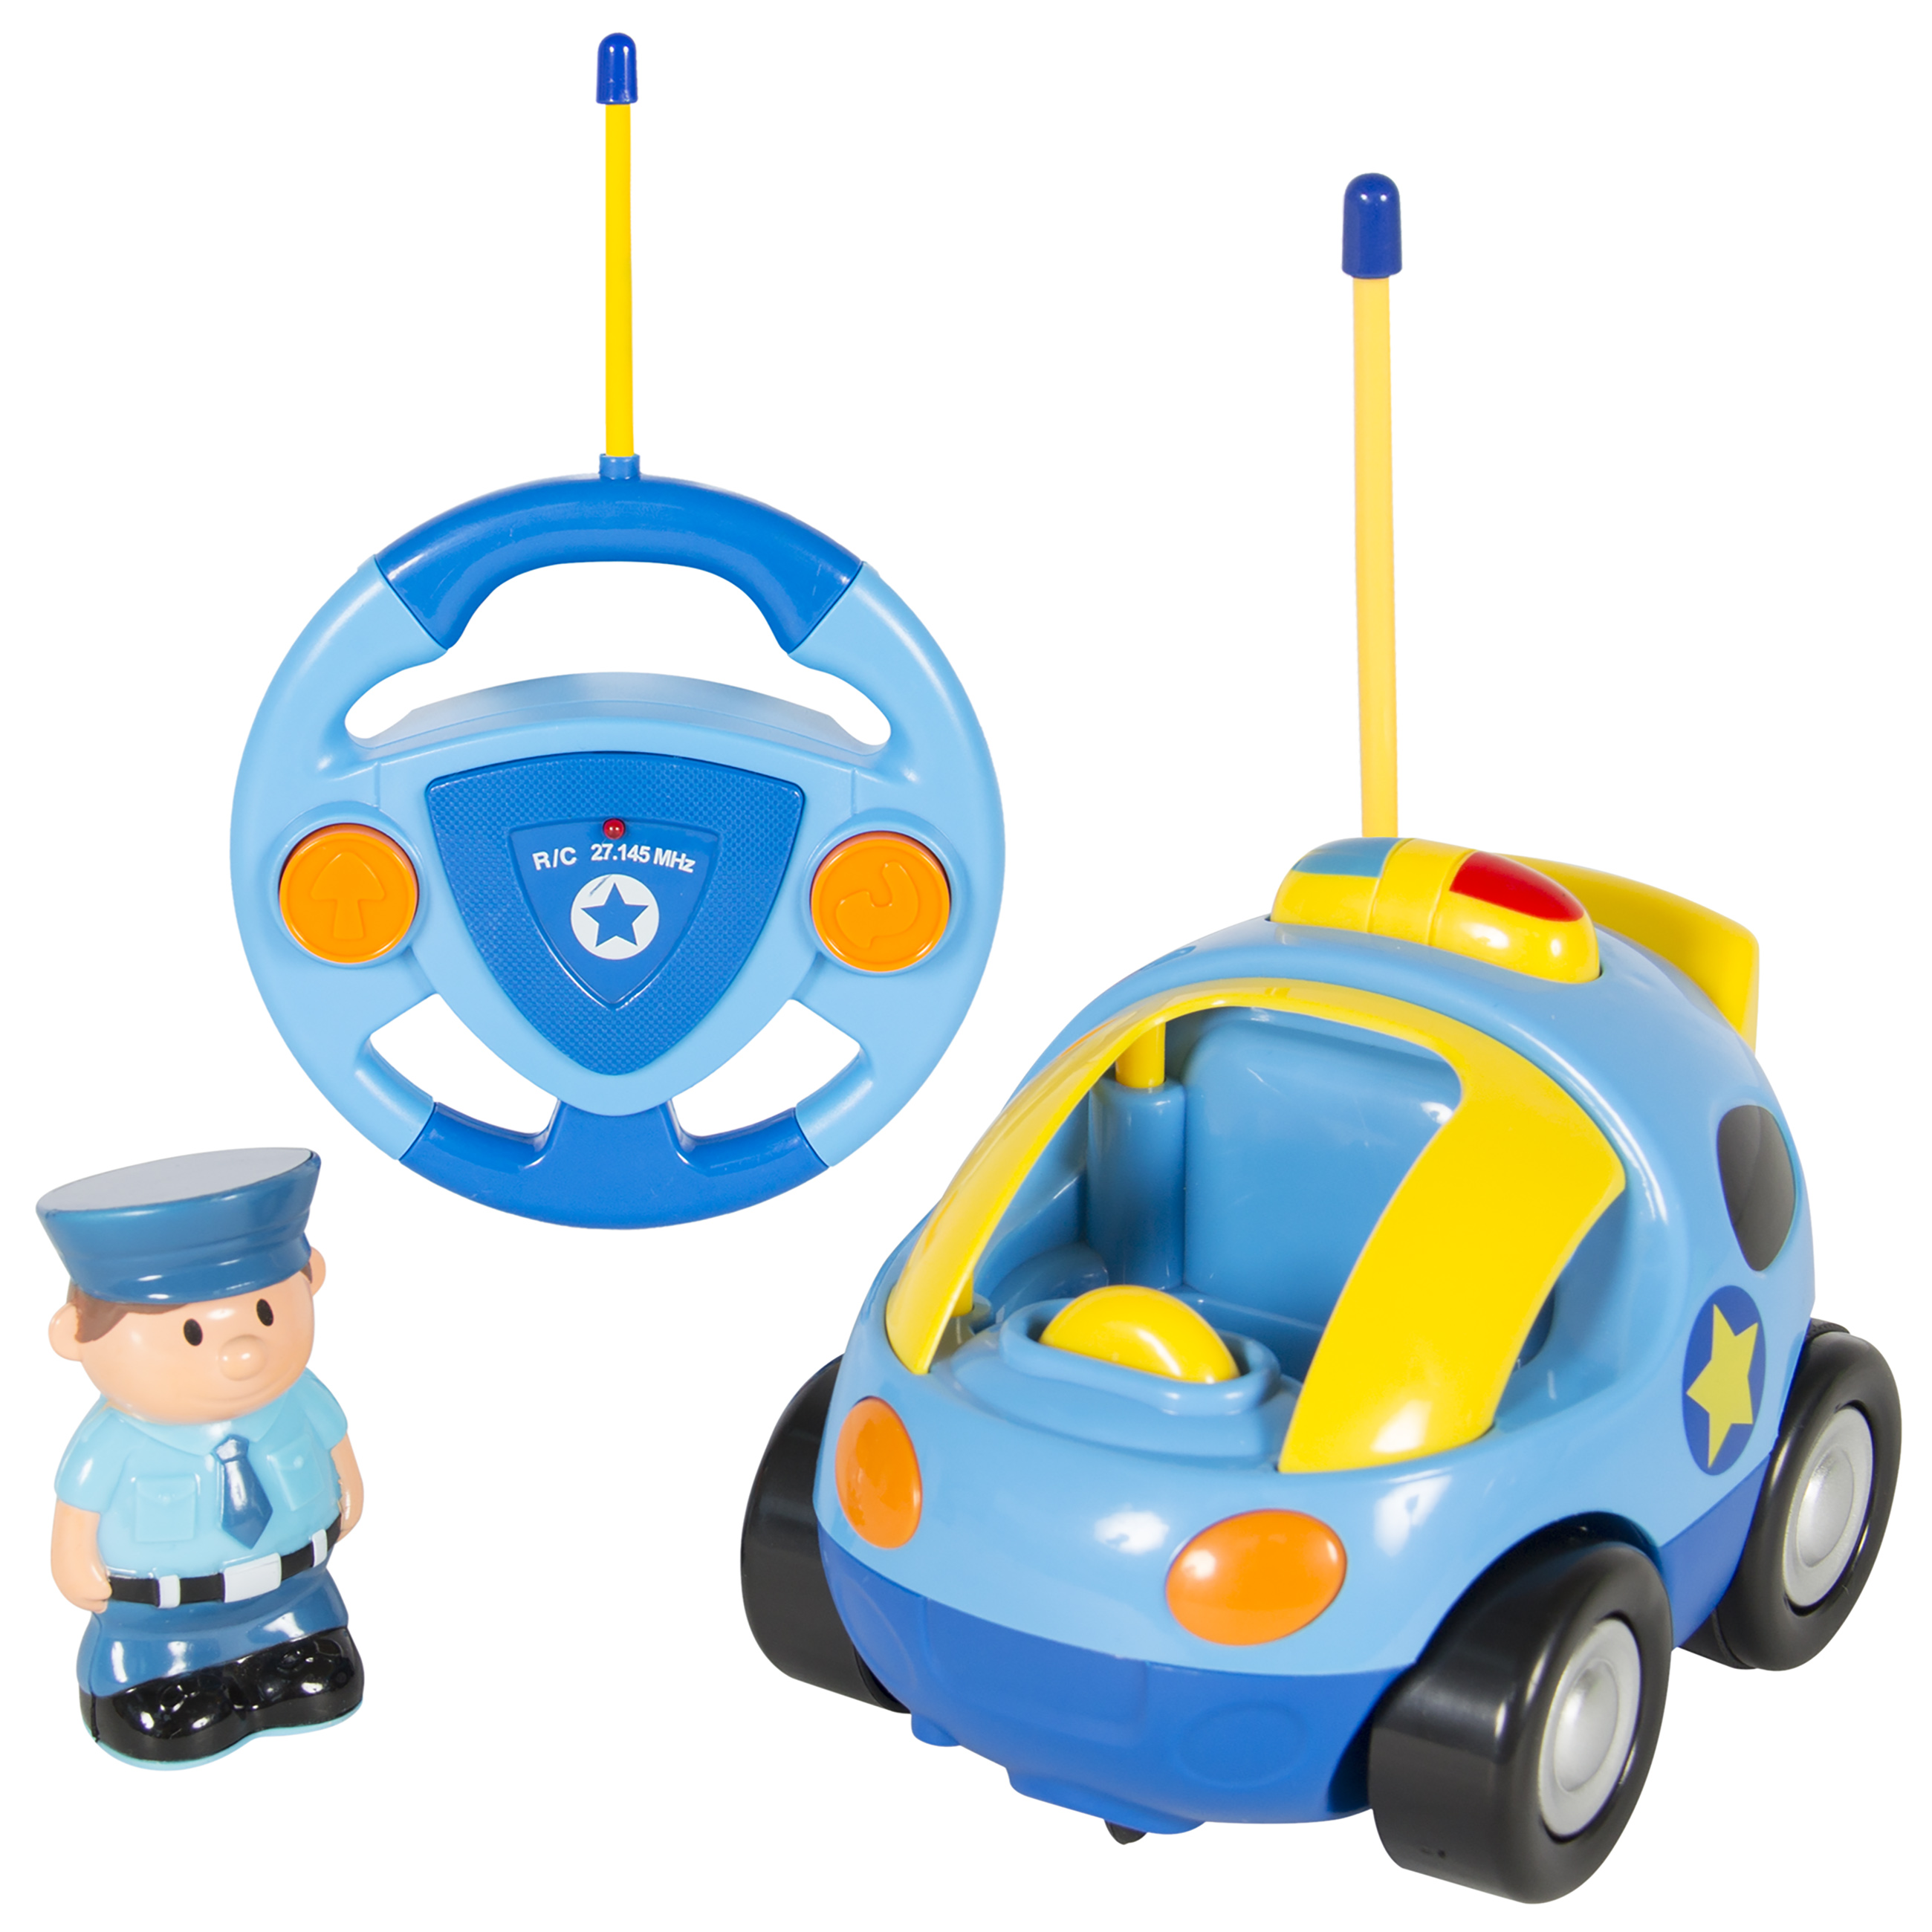 Best Choice Products 2-Channel Beginners Kids Remote Control Cartoon Police Car - Blue/Yellow - image 2 of 5